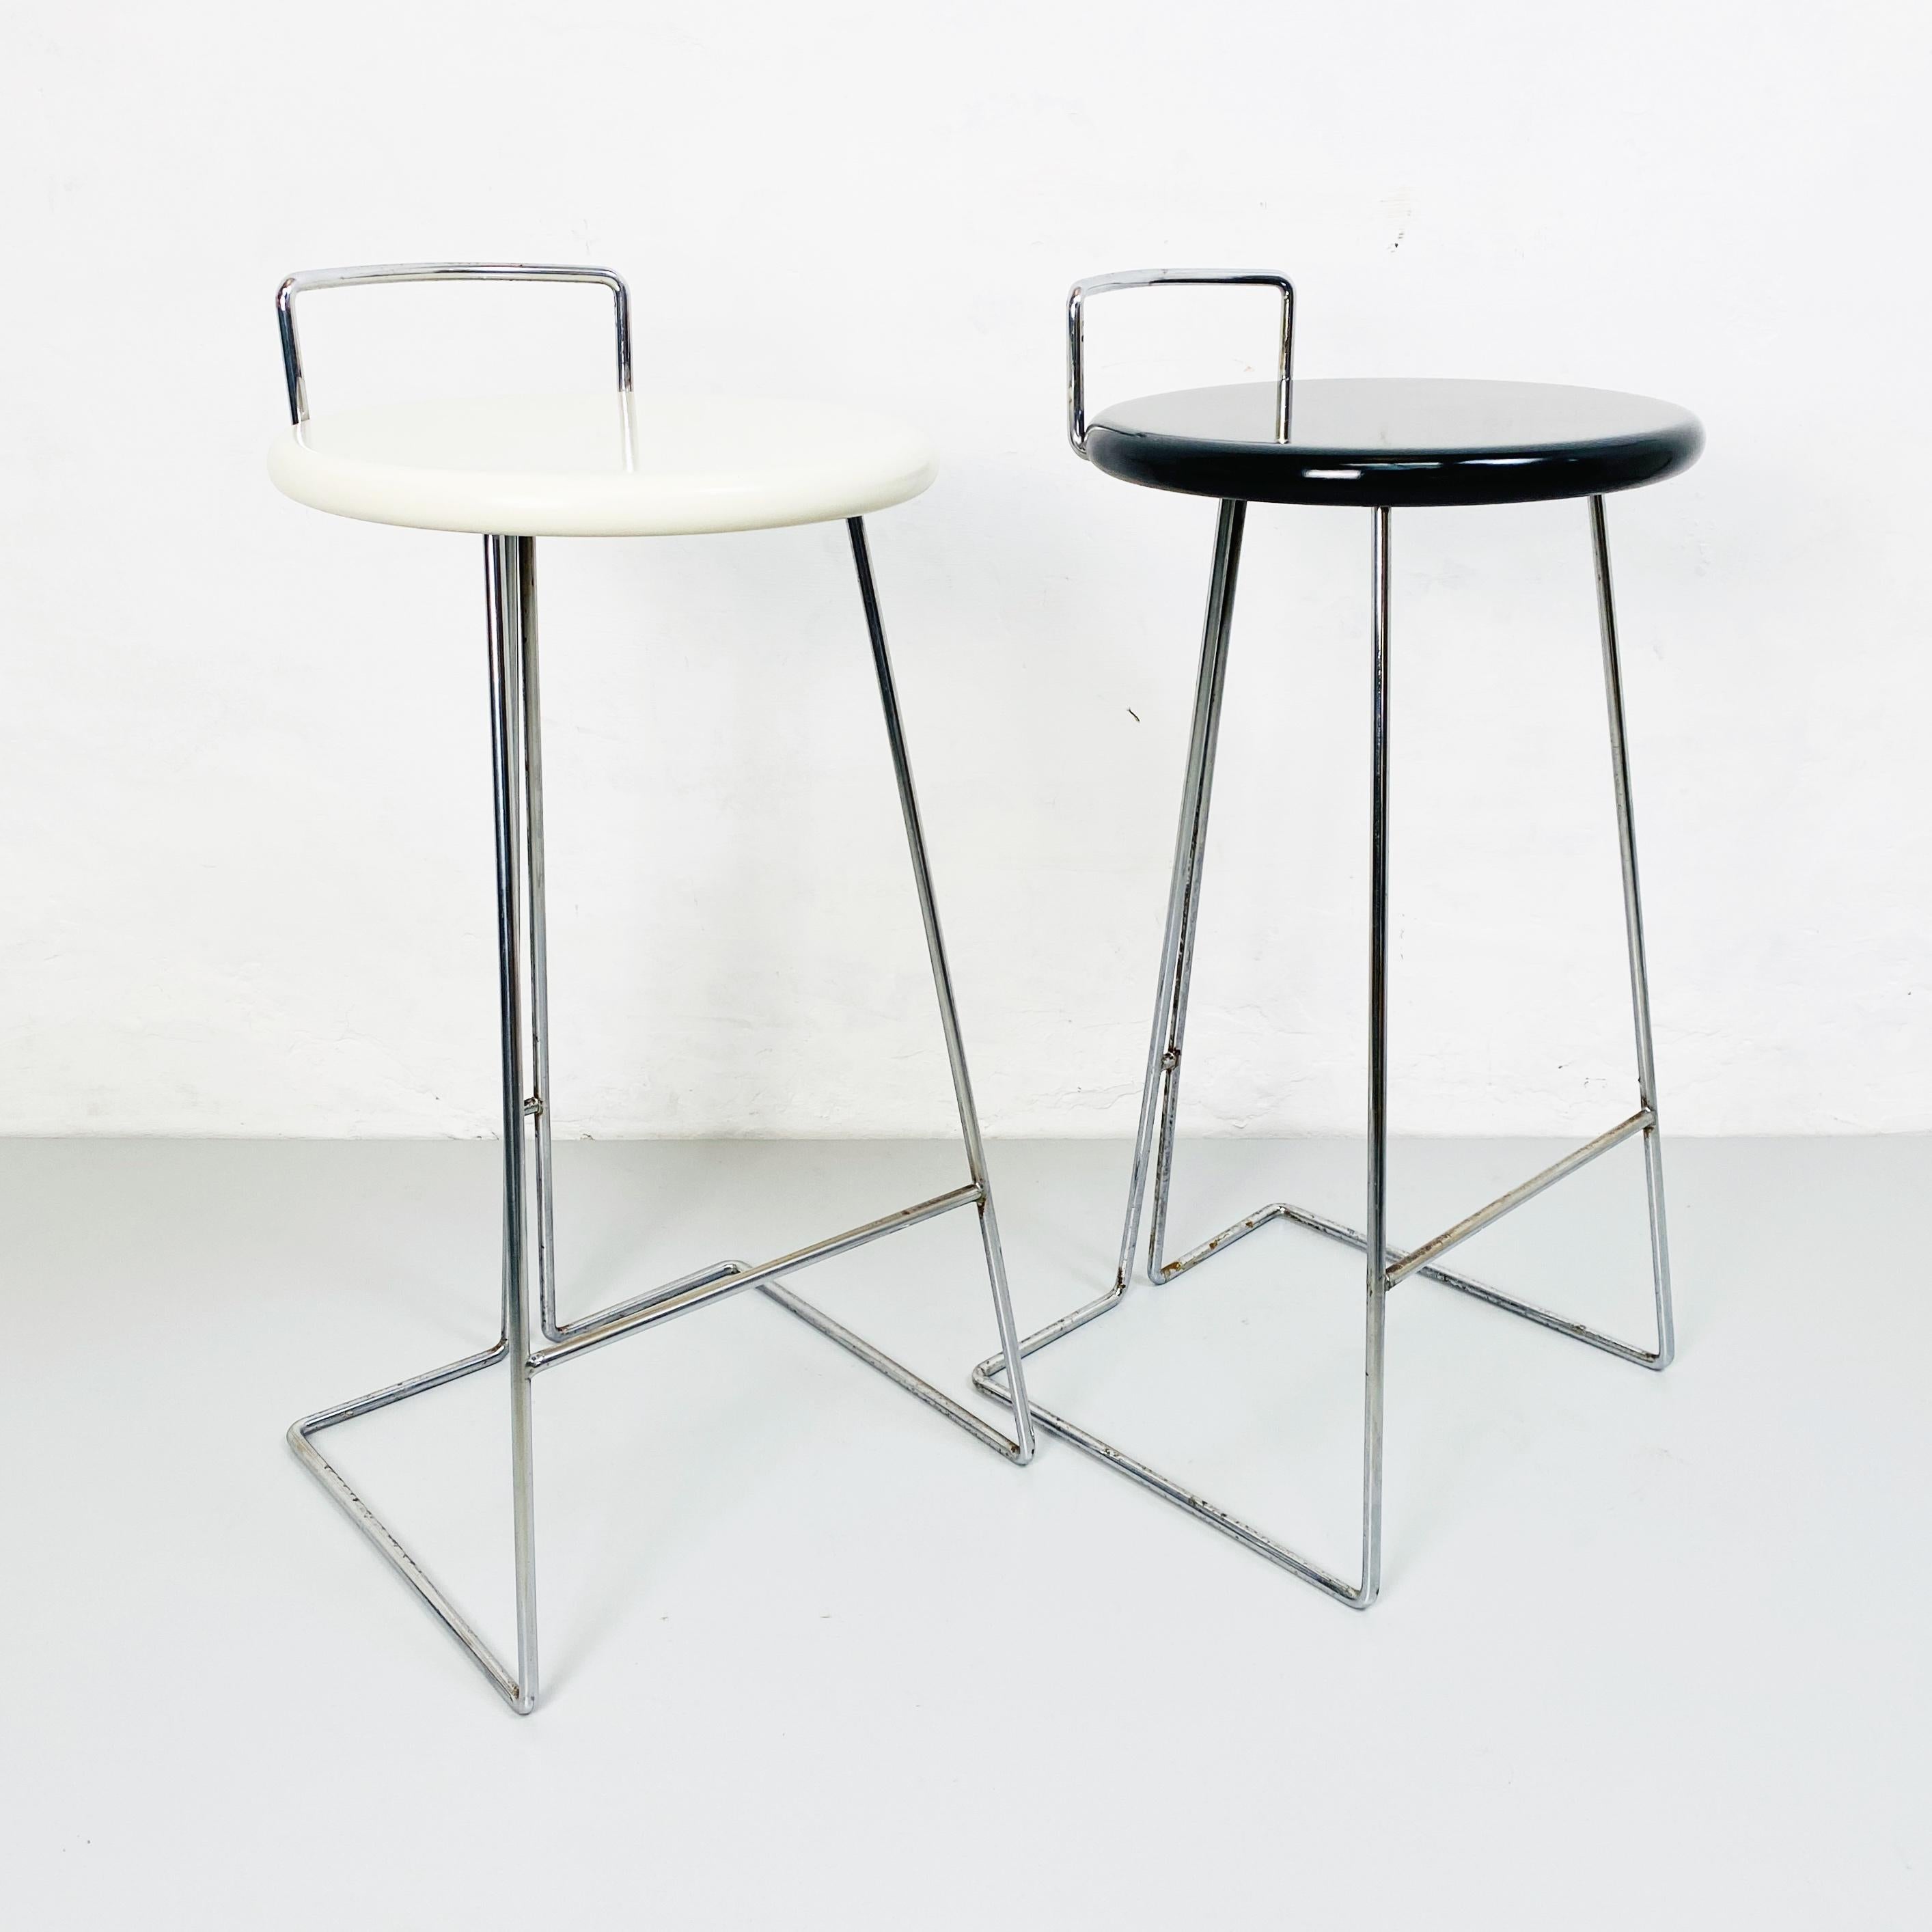 Set of black and white chromed metal stools by Dada, Italy, 1980s
Set of high stools with chromed metal structure and round seat in black and white painted wood.By Dada, Italy.

1980s

Good condition, chrome plating skipped in some places